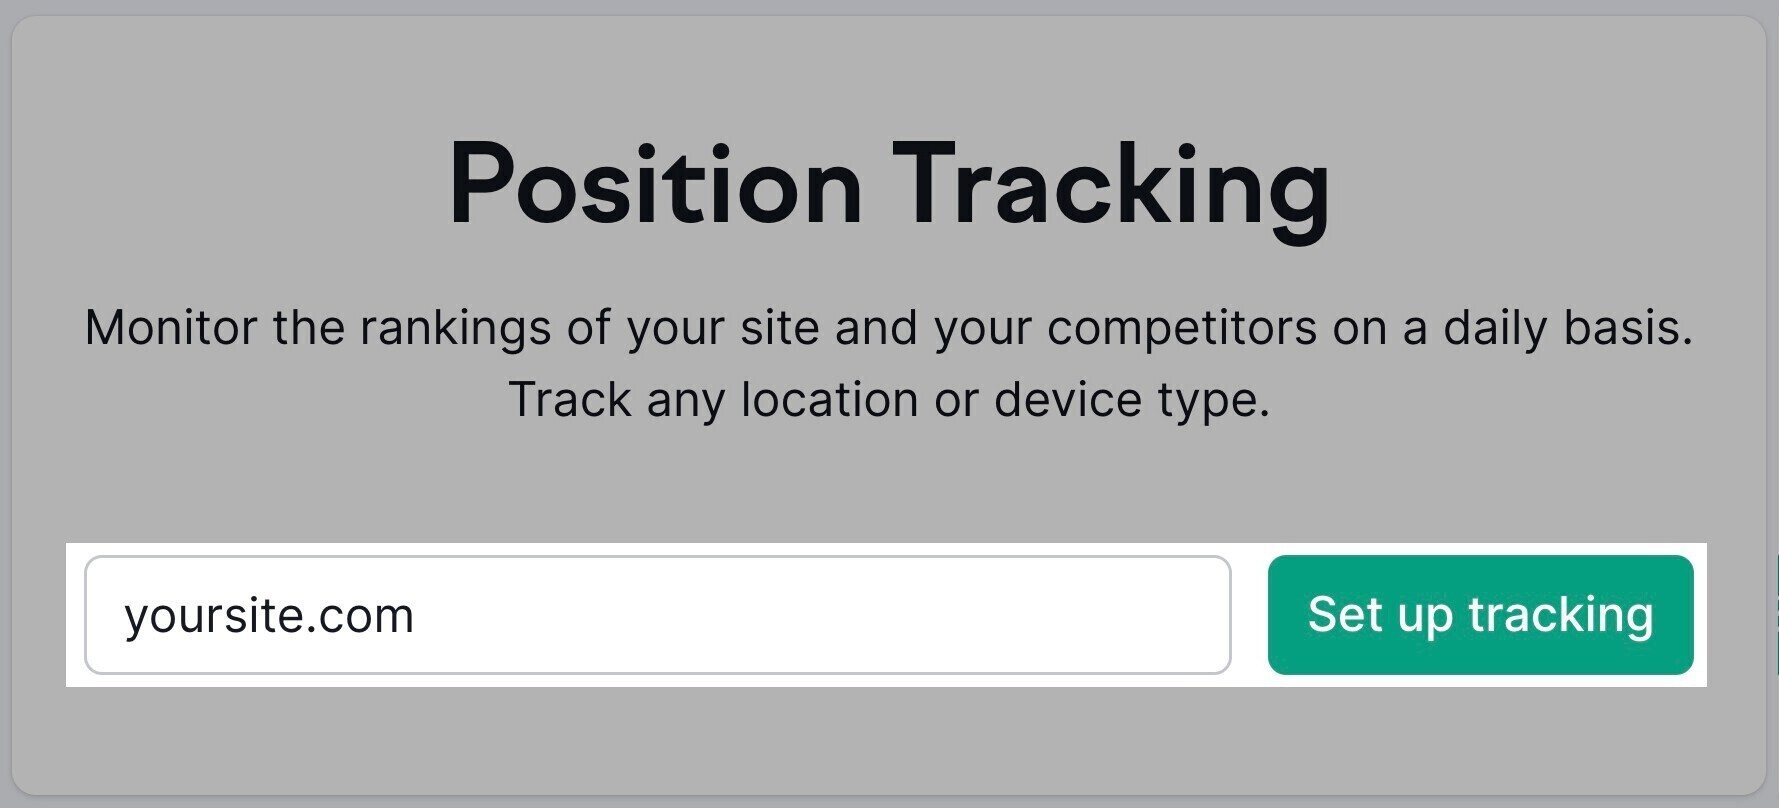 position tracking tool